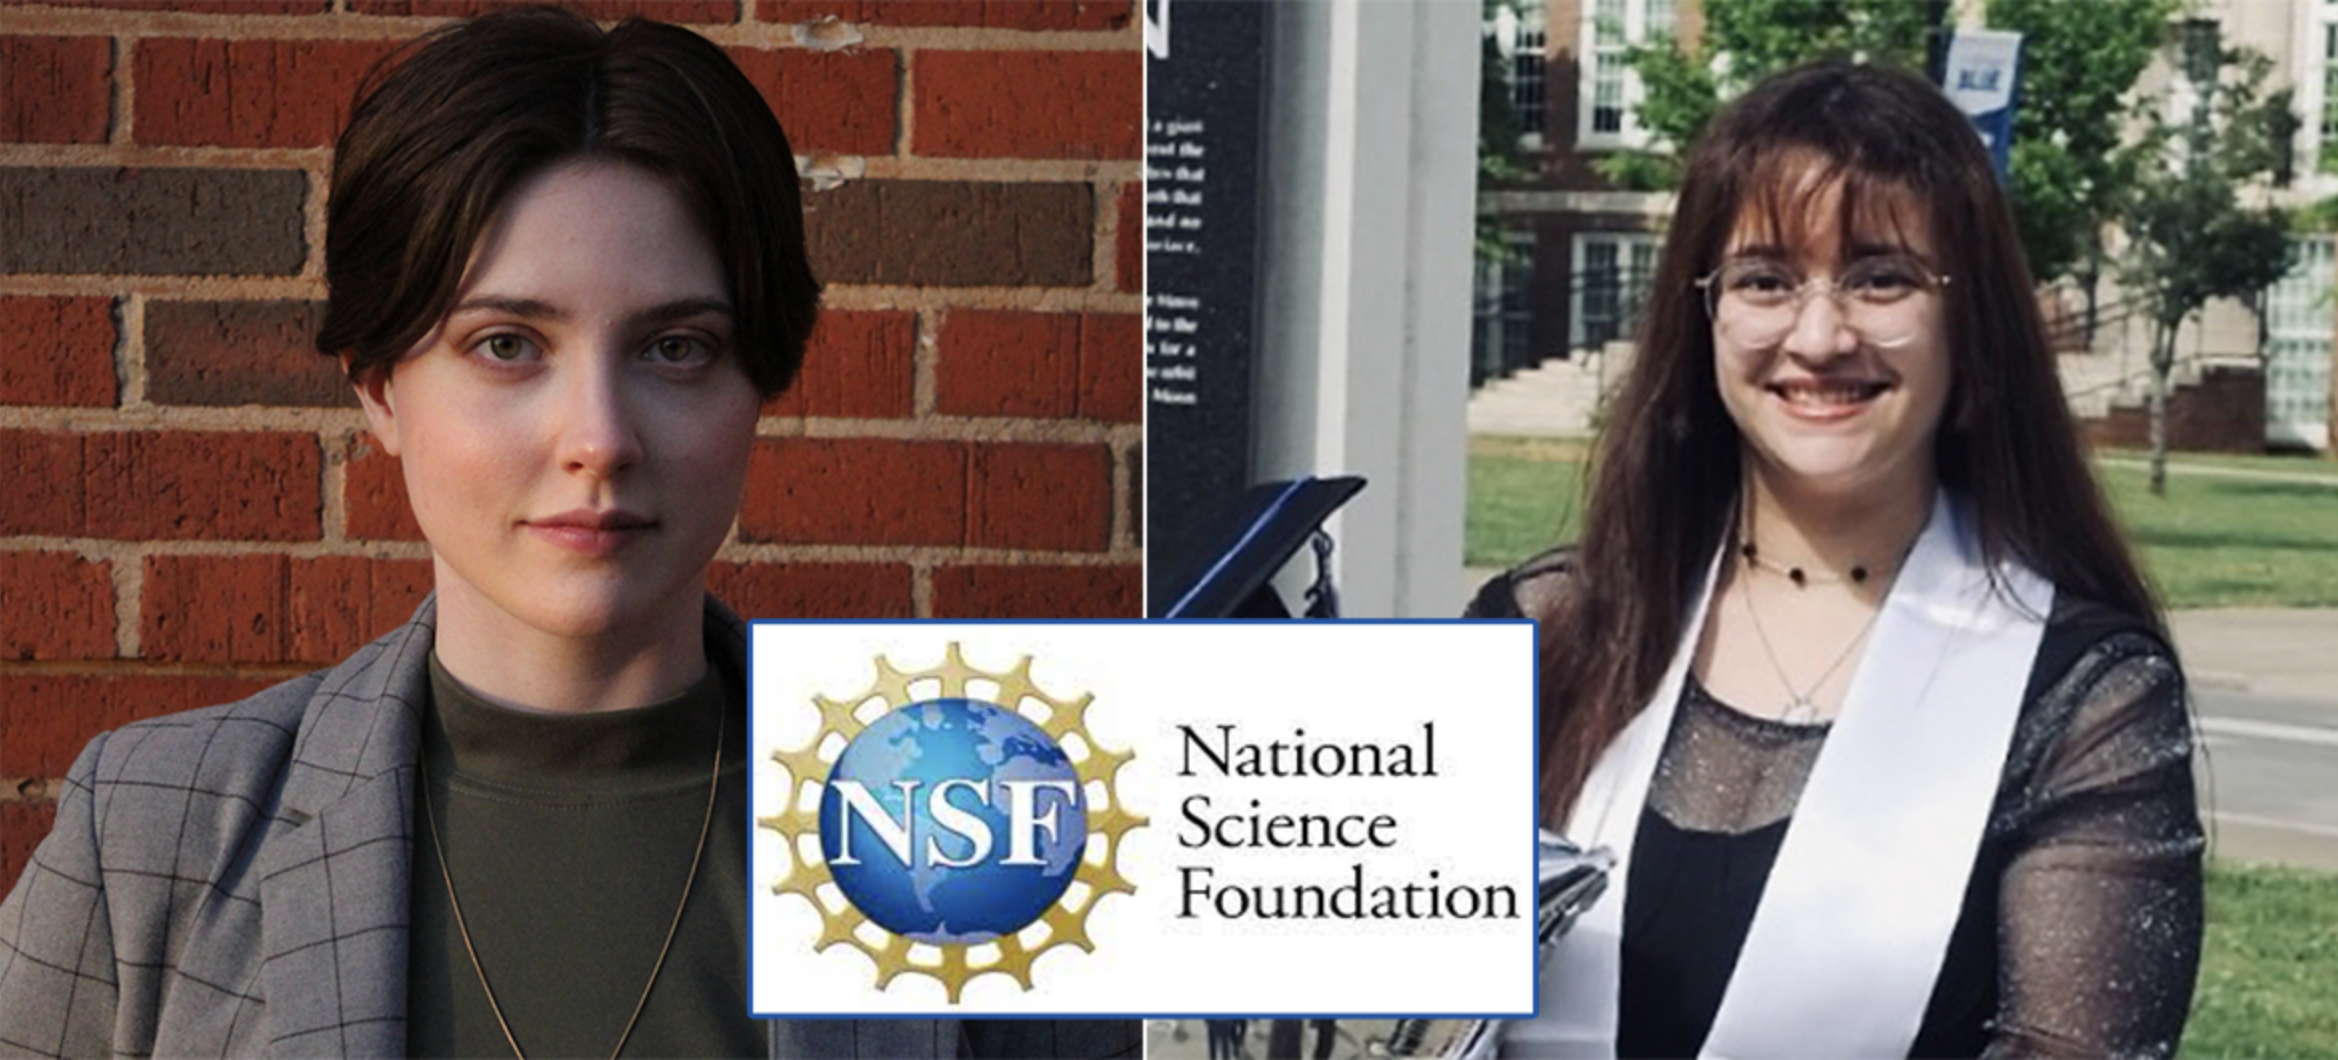 Monika Fouad, who just graduated with her degree in professional physics and biochemistry and will continue her studies at Michigan State University this fall, and Dara Zwemer, a psychology alumni and Ph.D. student at the University of Utah, both earned spots in the five-year NSF Graduate Research Fellowship Program.